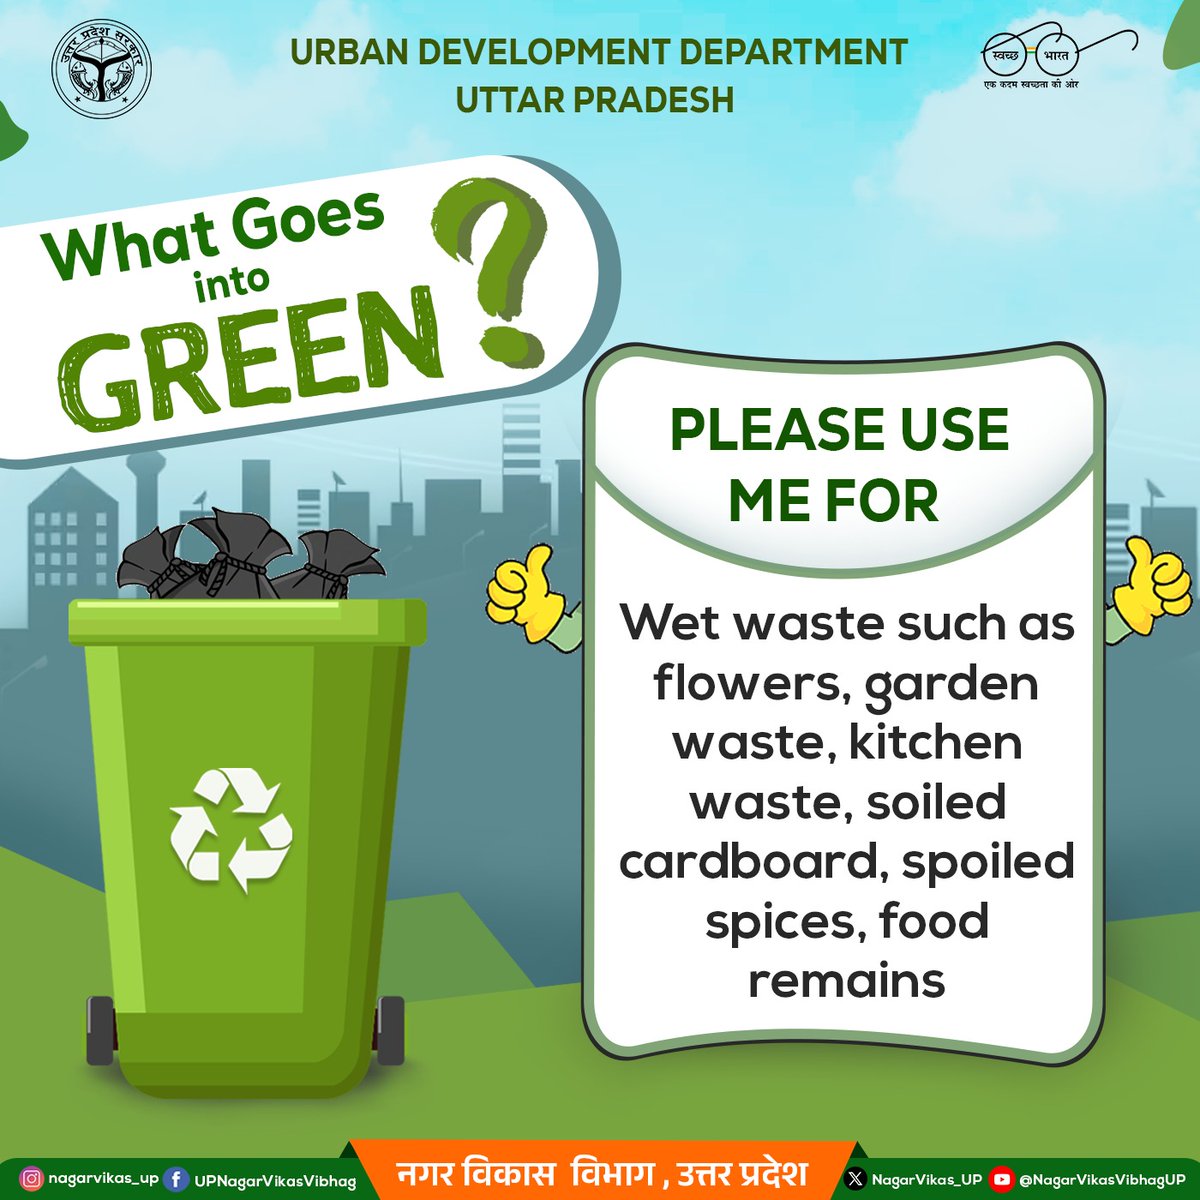 Let's work together for a greener city! Your green bin ♻️ is where food remains, garden waste, kitchen waste, and even pet waste gets a new life. 🌱

#GreenBin #CleanCity #Compost #uttarpradesh #NagarVikas_UP #swachhbharat